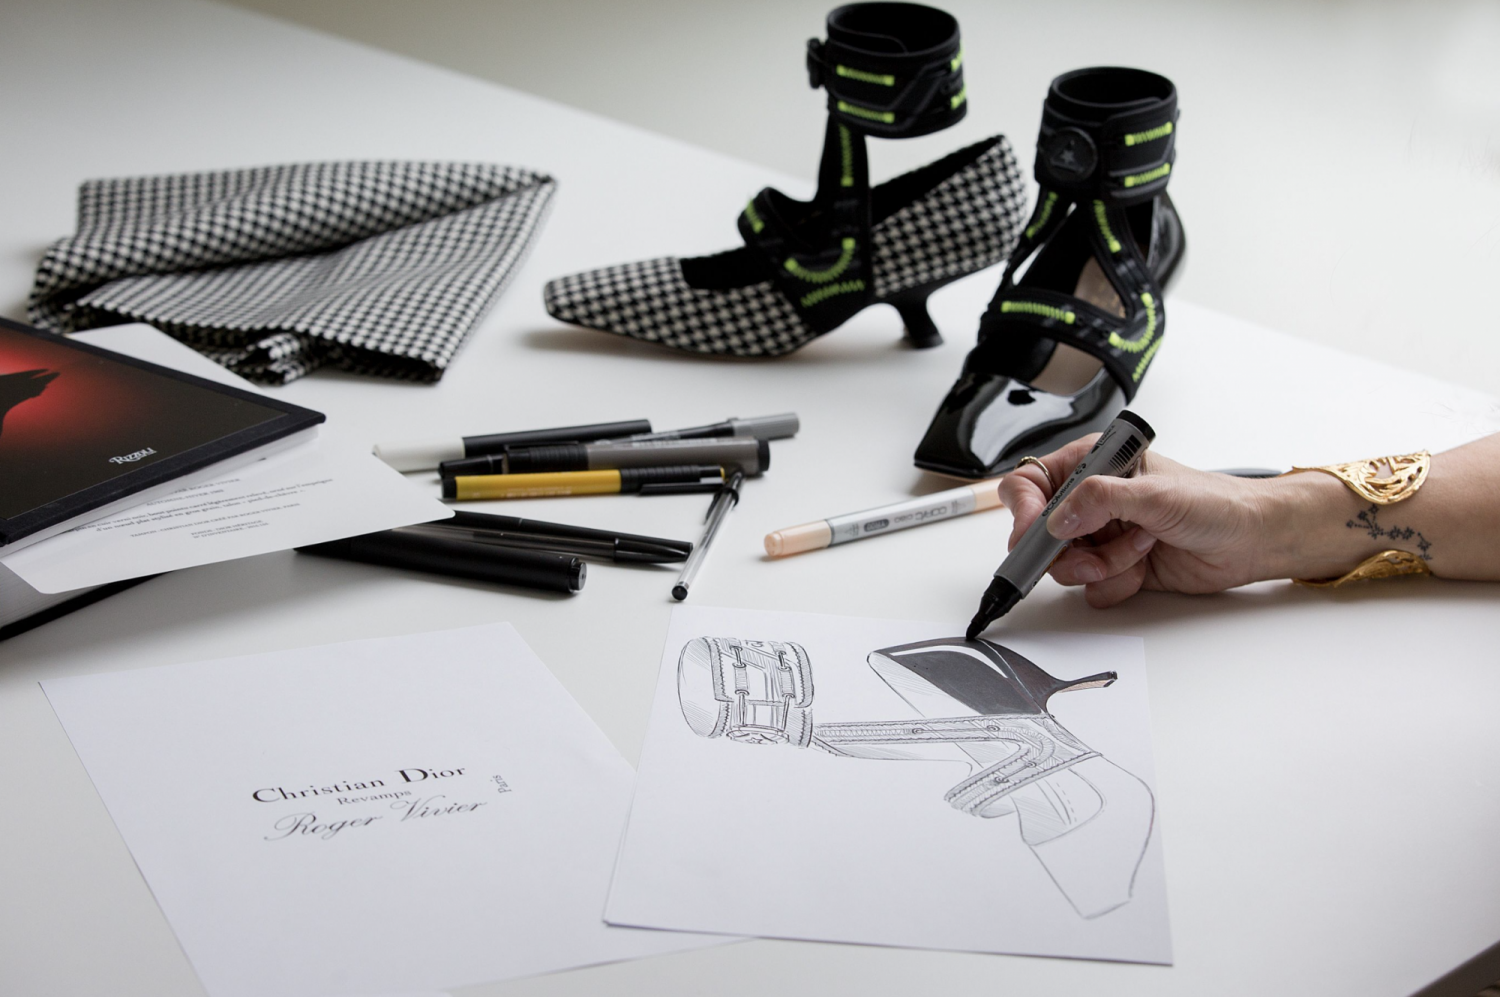 Designer maria Grazia Chiuri revives the iconic shoe design of Christian Dior and Roger Vivier with modern technology